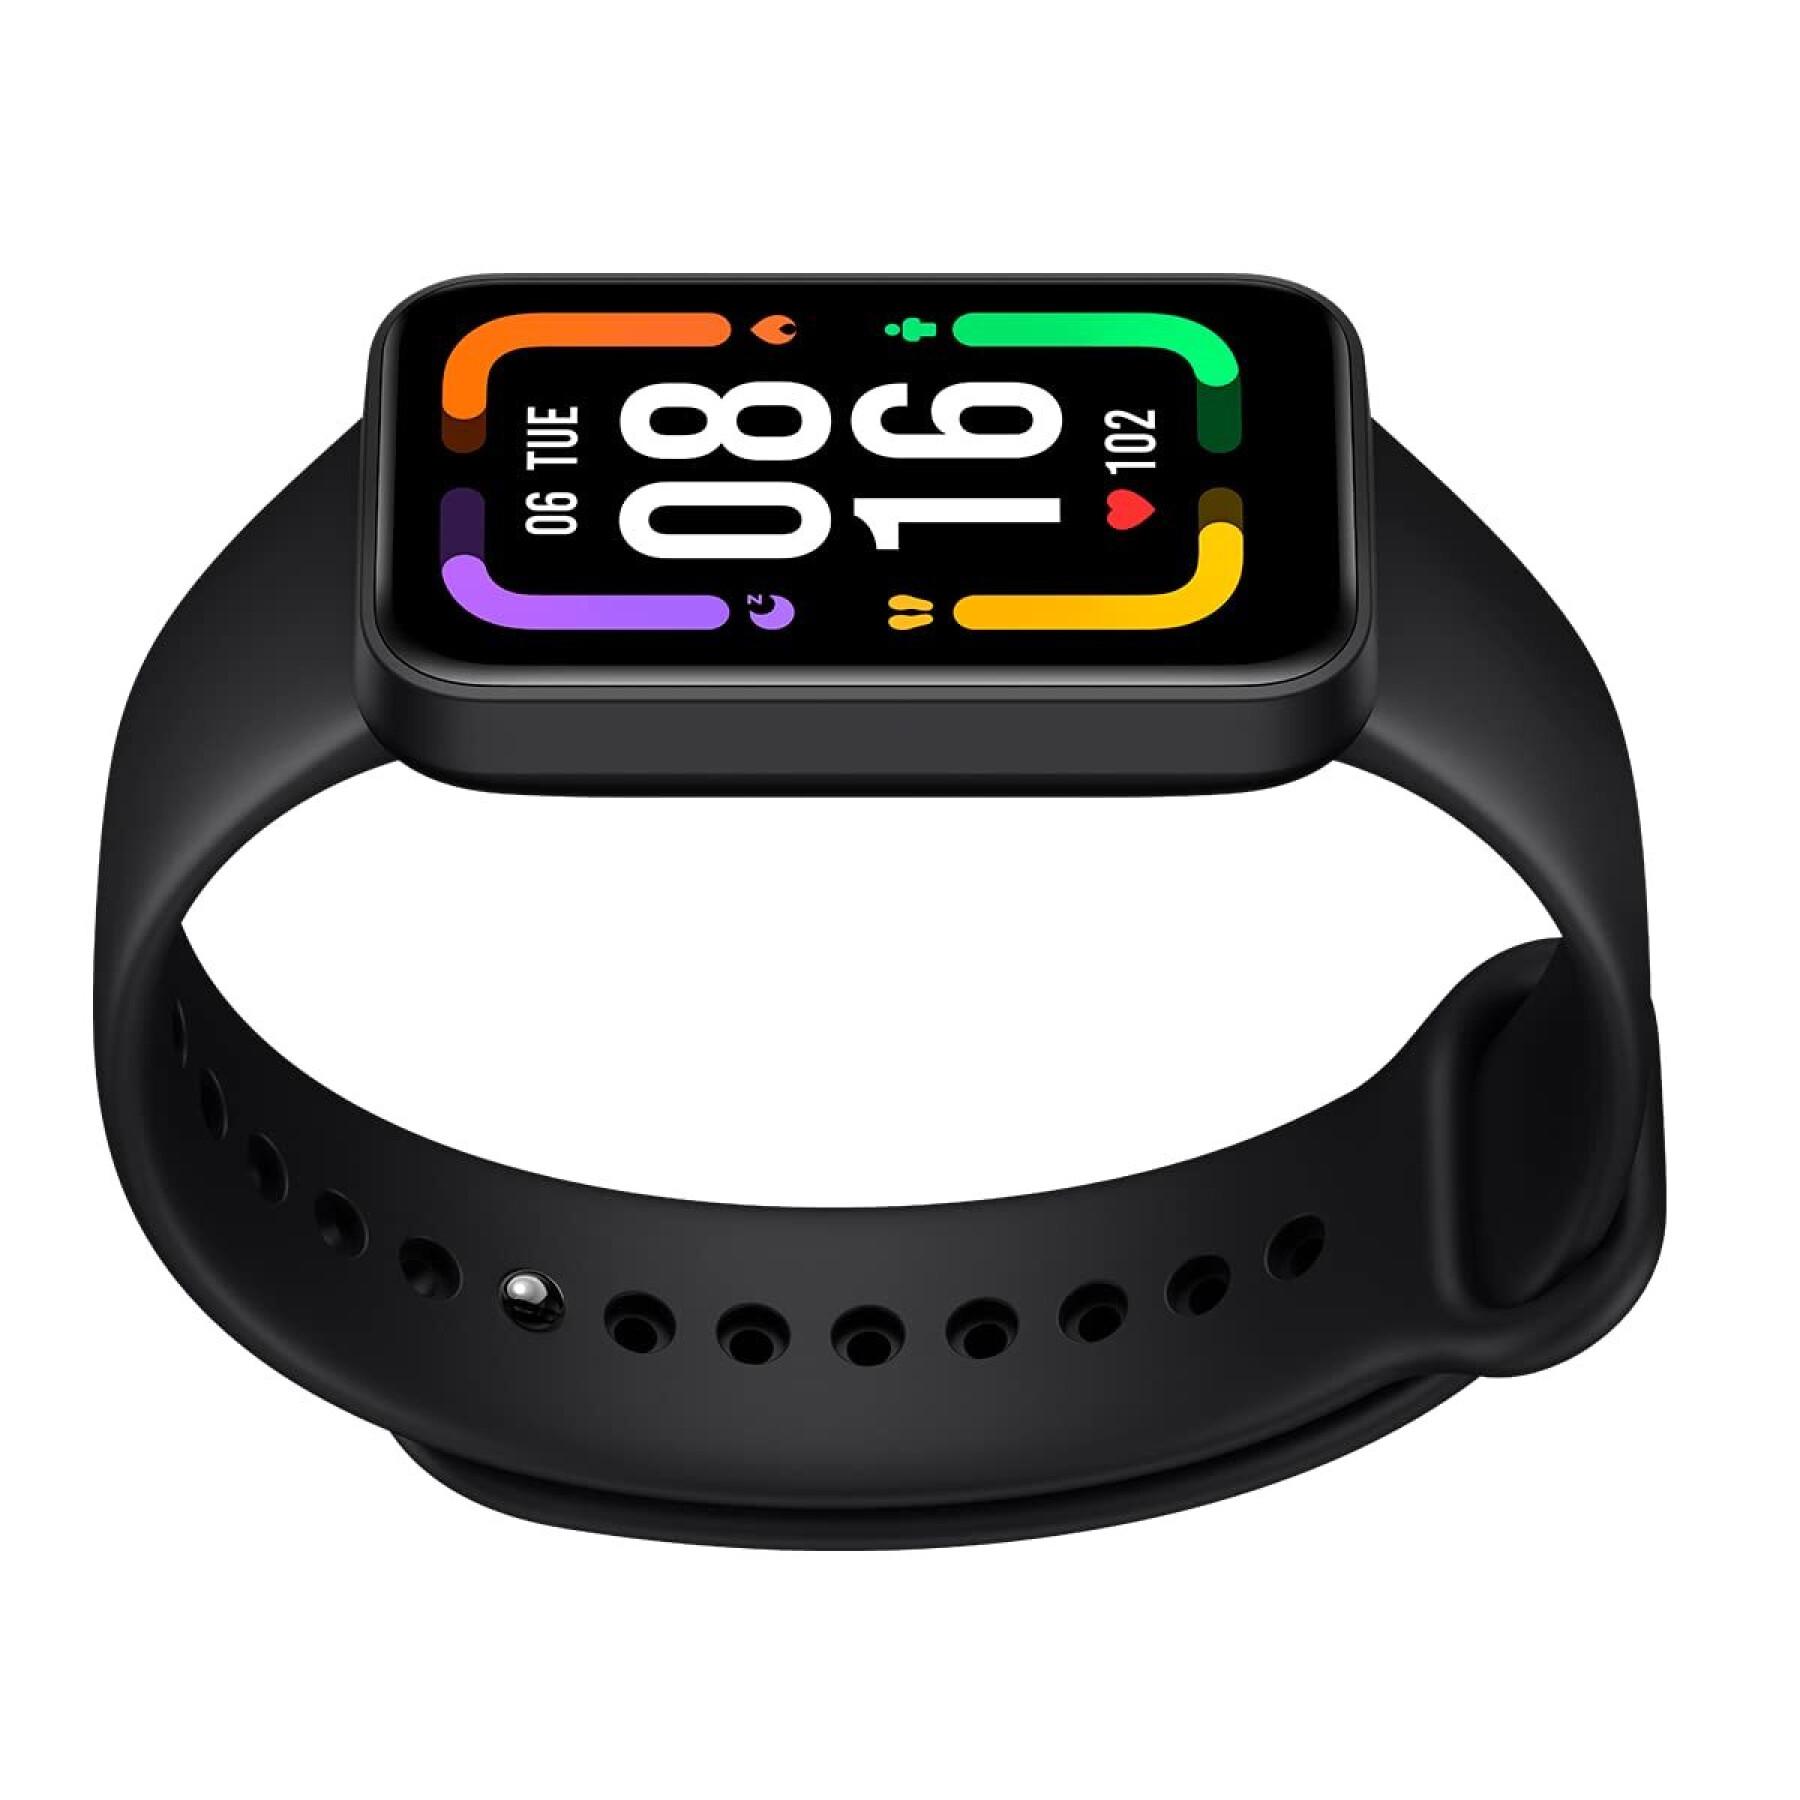 Connected watch Xiaomi Redmi Smart Band Pro